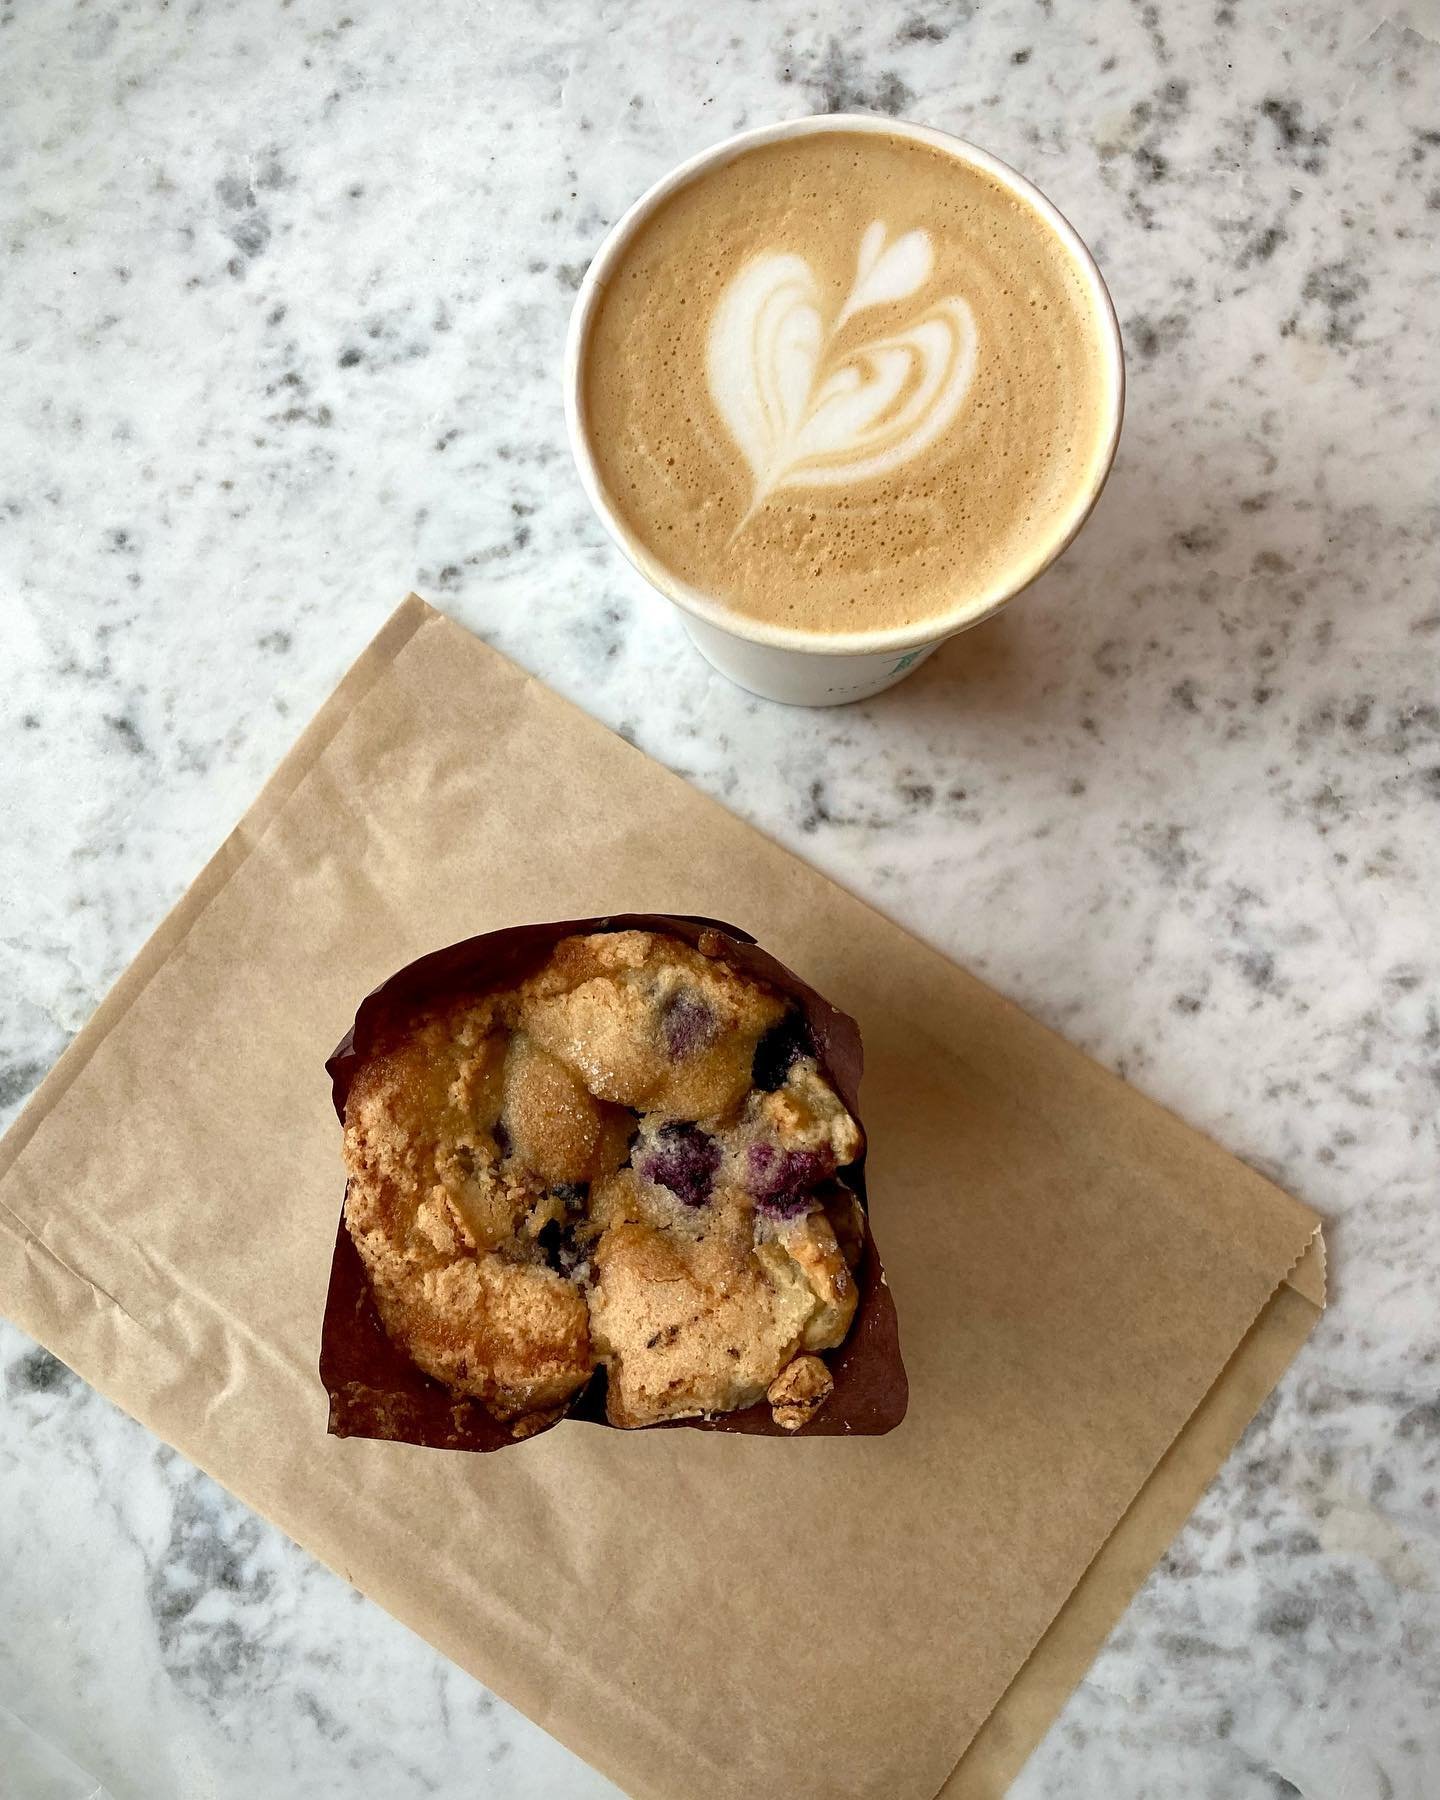 We have fresh blueberry muffins and chocolate chip cookies in stock! 
The perfect weekend pick me up. 🫐☕️